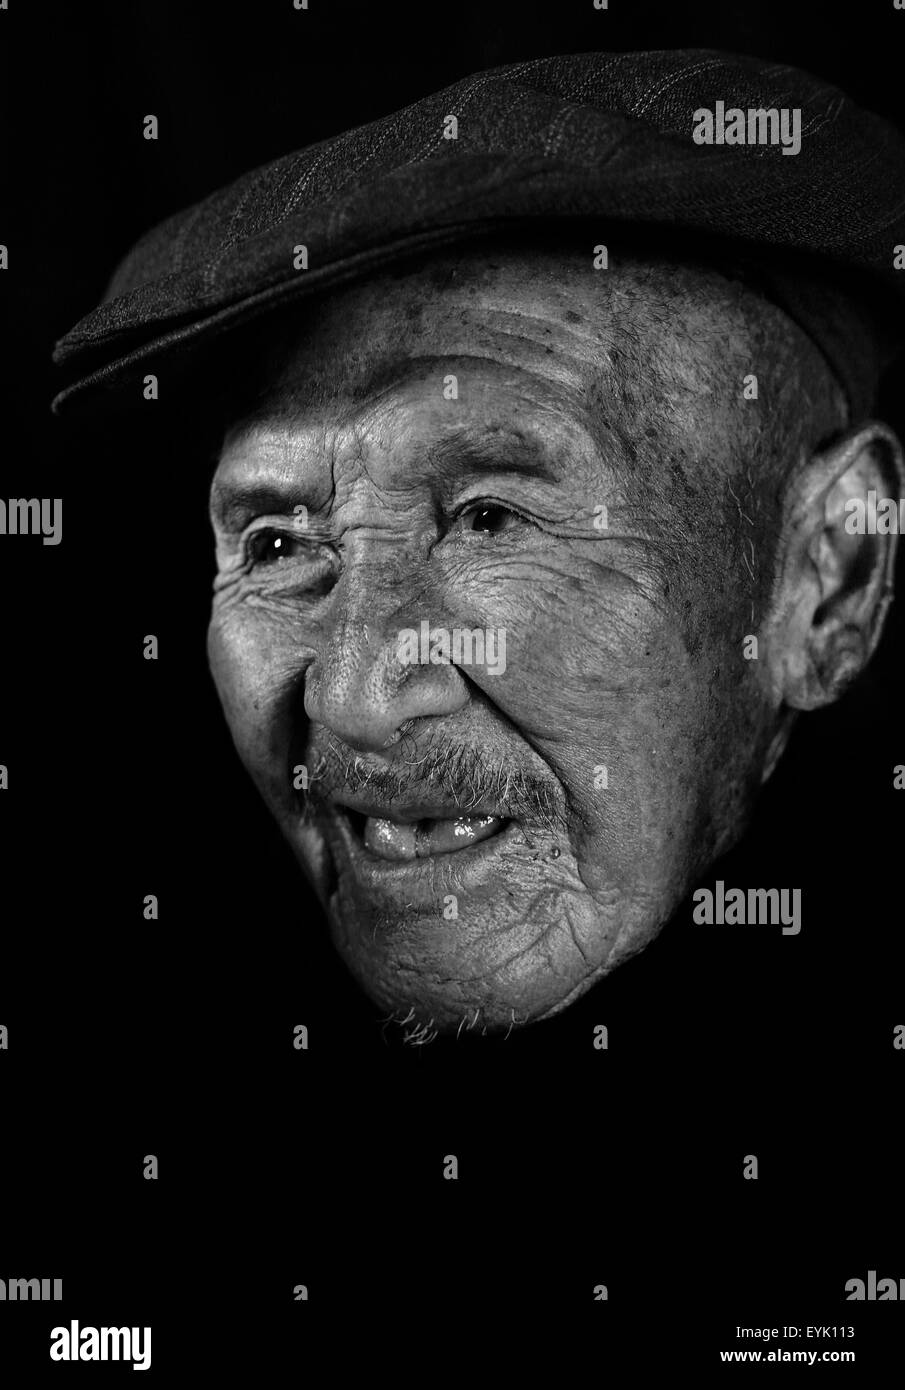 Chn. 27th Aug, 2014. CHINA : (EDITORIAL USE ONLY. CHINA OUT)(MINIMUM PRICE: 100 USD)Liu Guoxing: Male, born in 1919 and now lives in Yongzhou Hunan. A soldier in 6th Squad 2nd platoon 3rd Company 1st Battlion 8th Regiment 4th Brigade of Hunan Guard Army. He was trained to take aim, and load the gun in Zixian, using 38 type rifle, with 12 rows of bullets, 2 grenades. There were 10 people in every squad, light machine guns and heavy machine guns in each group, and 2 light machine guns in each company. Their foodstuff was so-so and sometimes not enough. It's been 70 years since the Second Worl Stock Photo